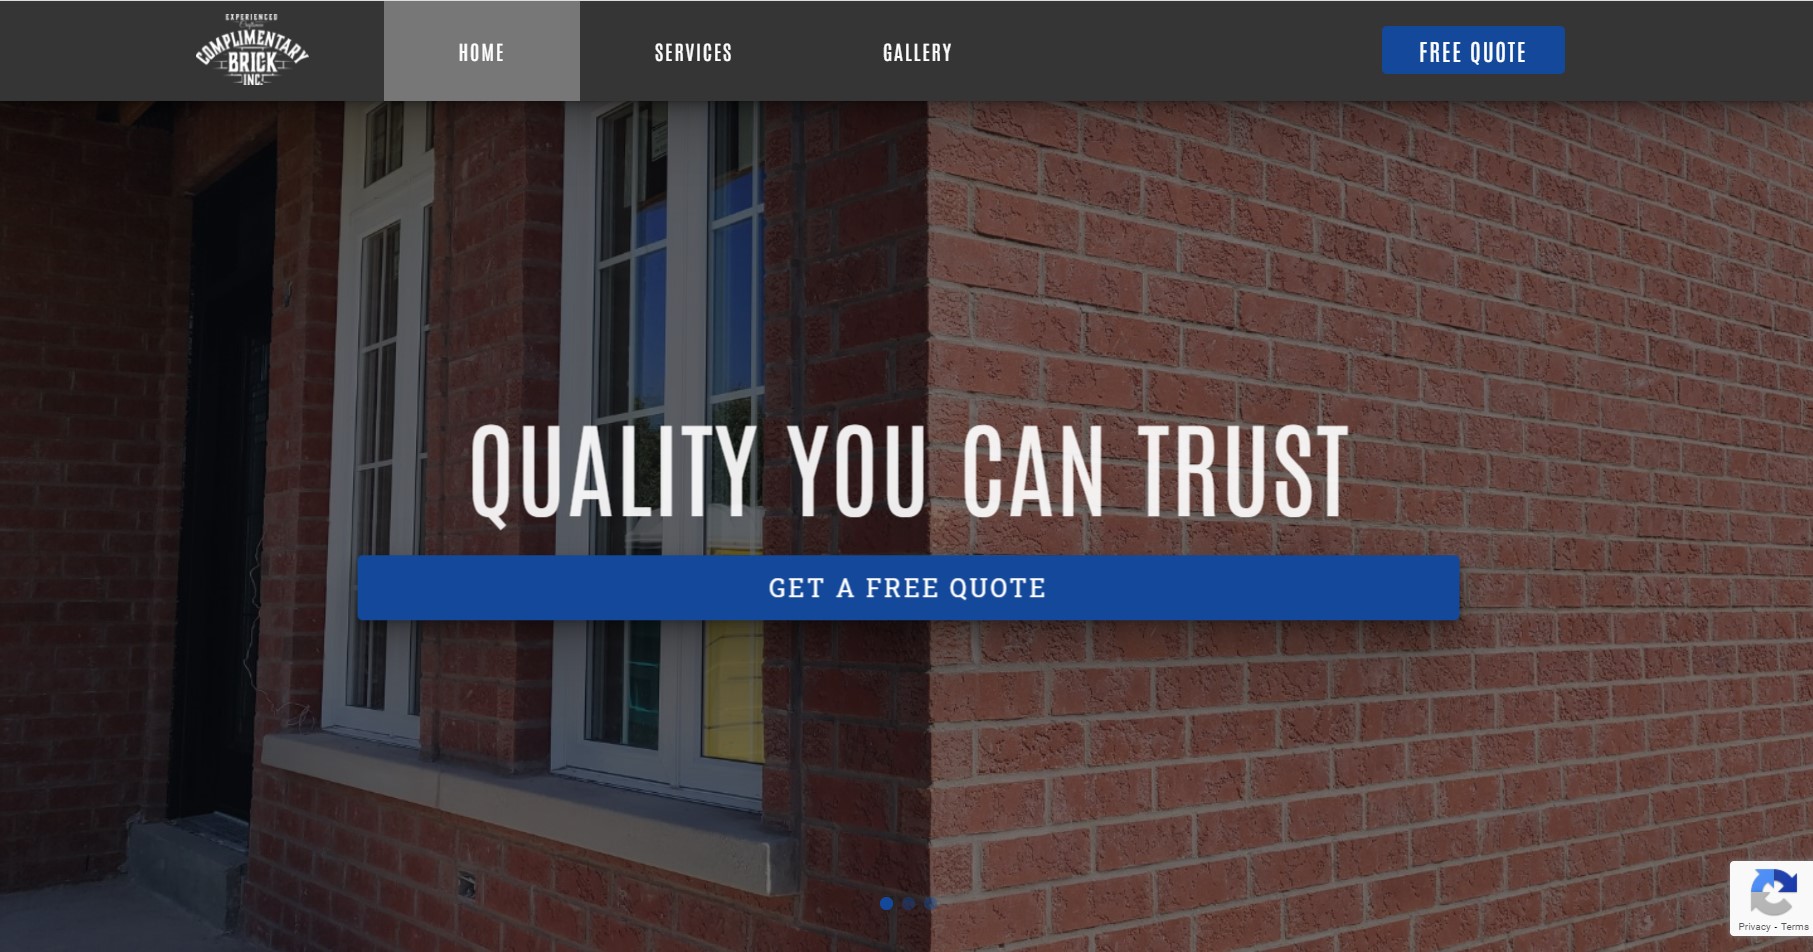 A red brick wall makes up the background image of this construction website. Large text in the middle of the image says 'Quality You Can Trust' with a large blue button underneath it.